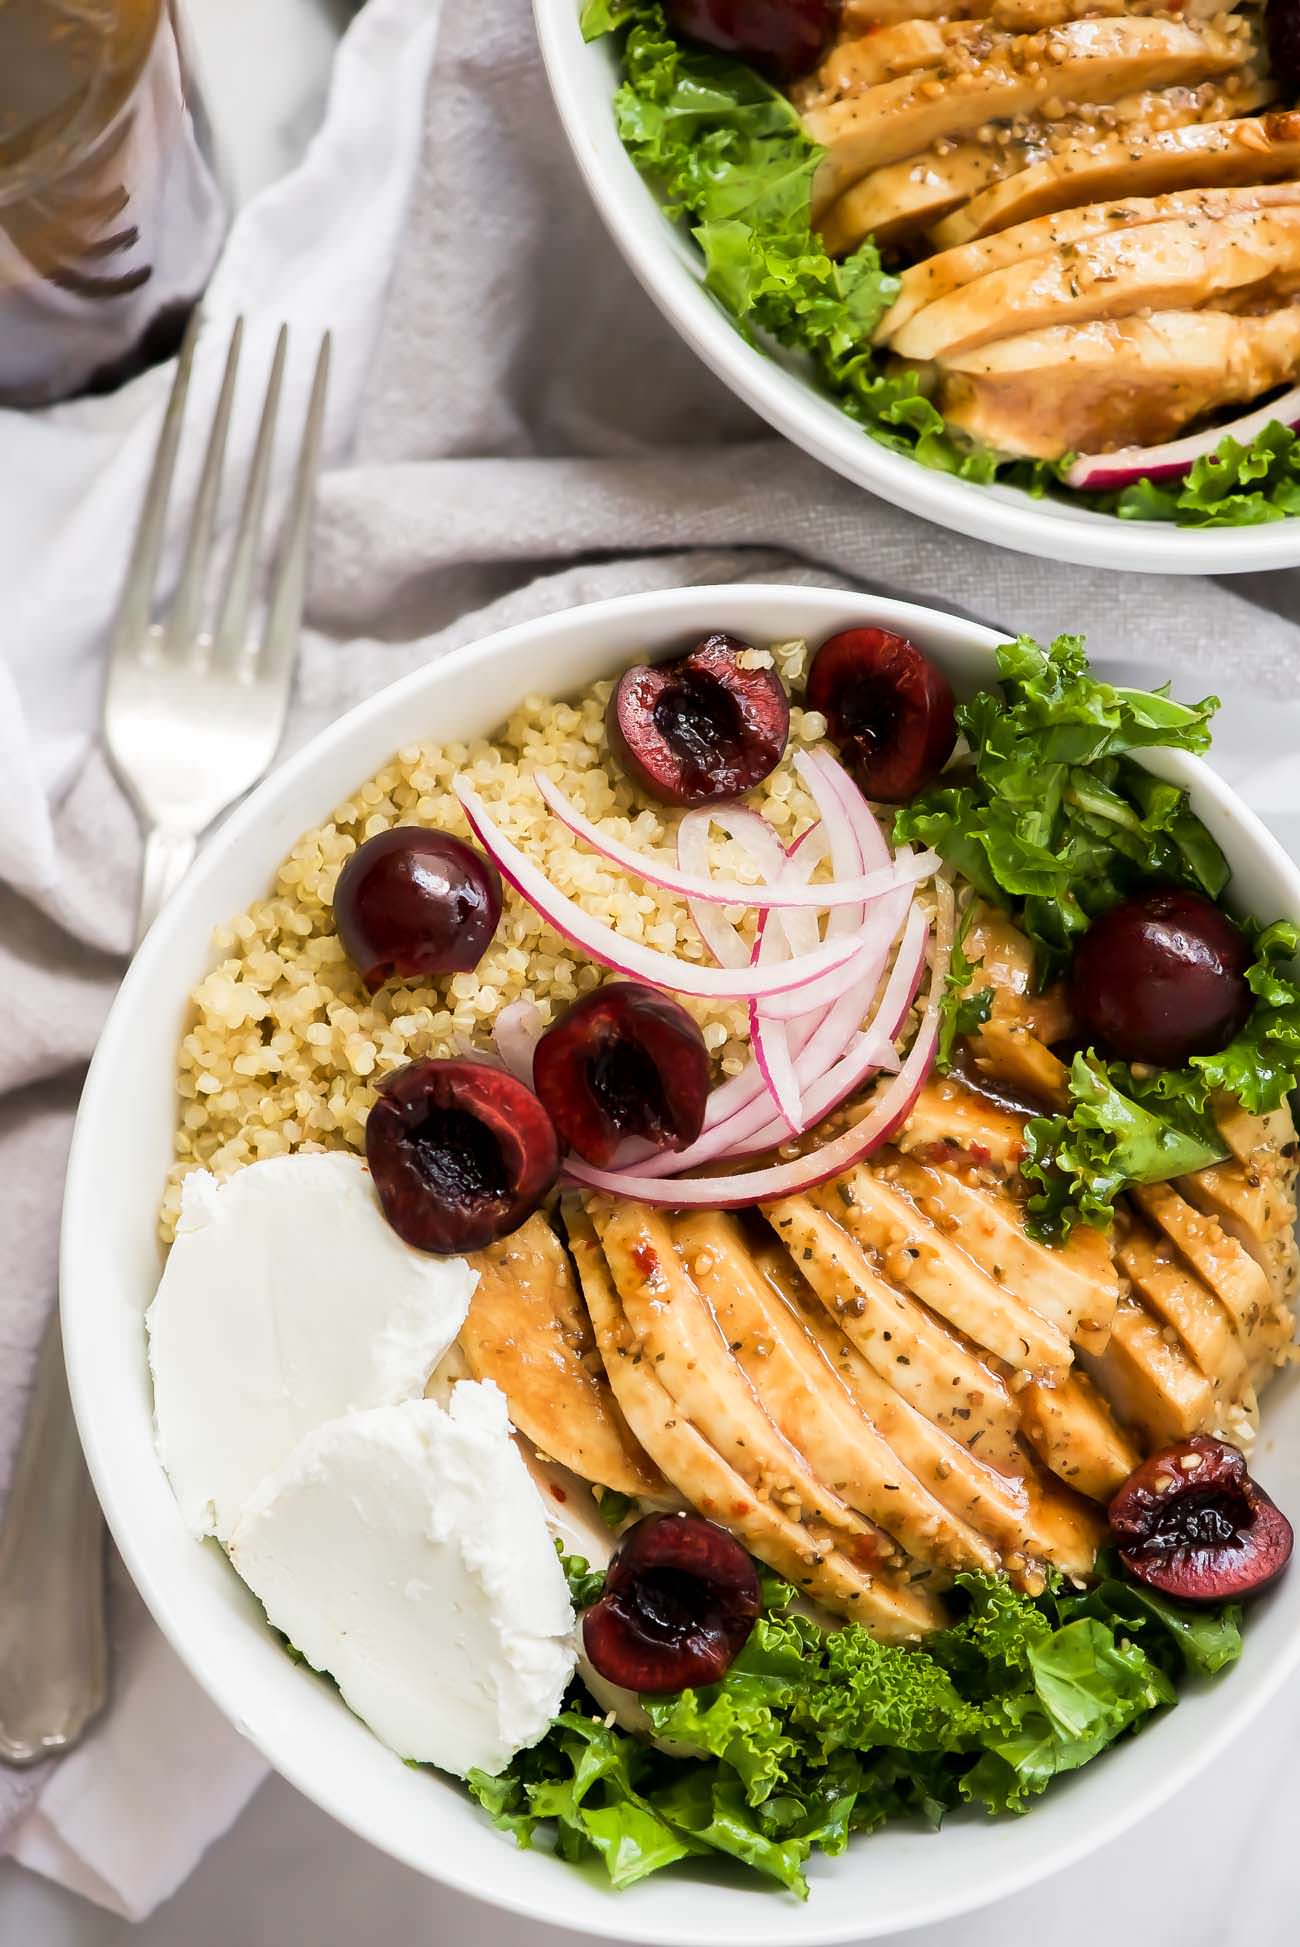 Honey Balsamic Glazed Chicken Quinoa Bowls are a hearty and flavor meal! Juicy chicken is coated in a sticky, sweet balsamic glaze then paired with fluffy quinoa, creamy goat cheese, and fresh cherries. A perfect make ahead meal!